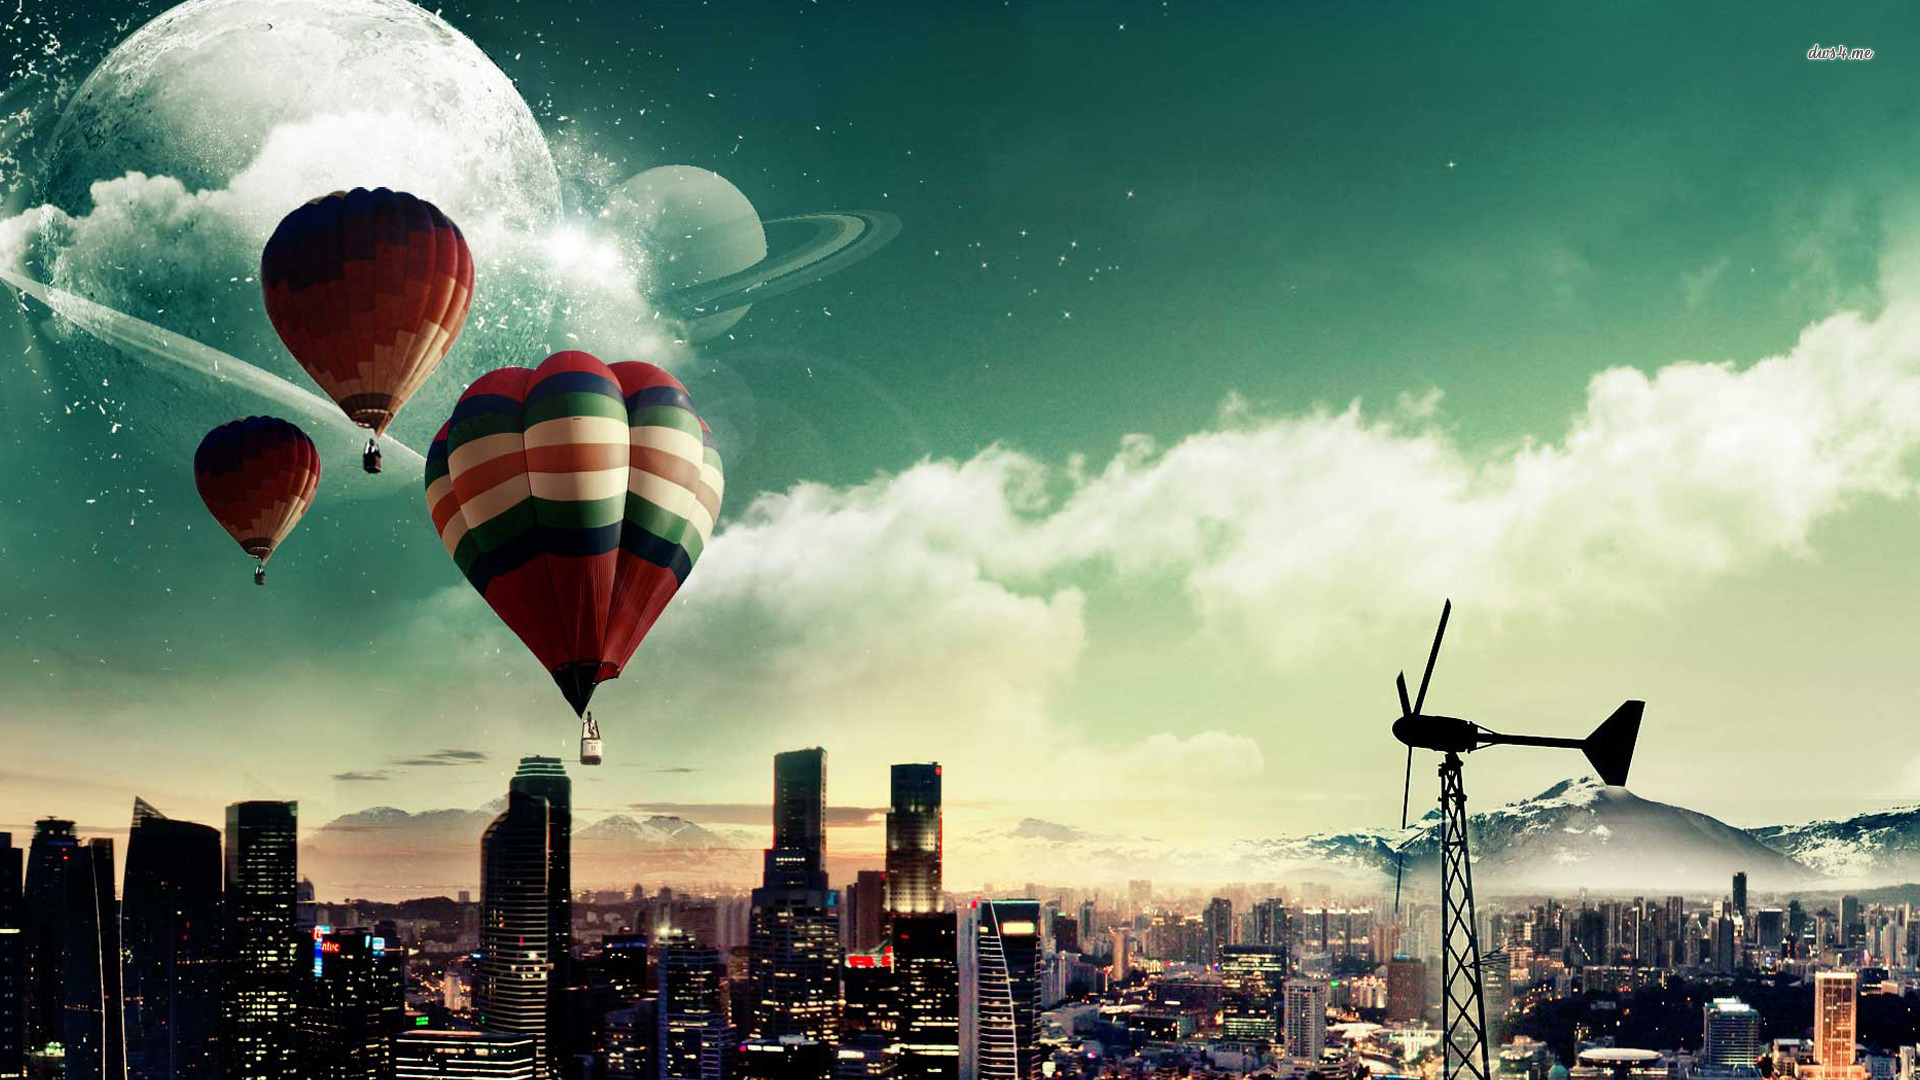 Hot Air Balloons In Sky Wallpapers